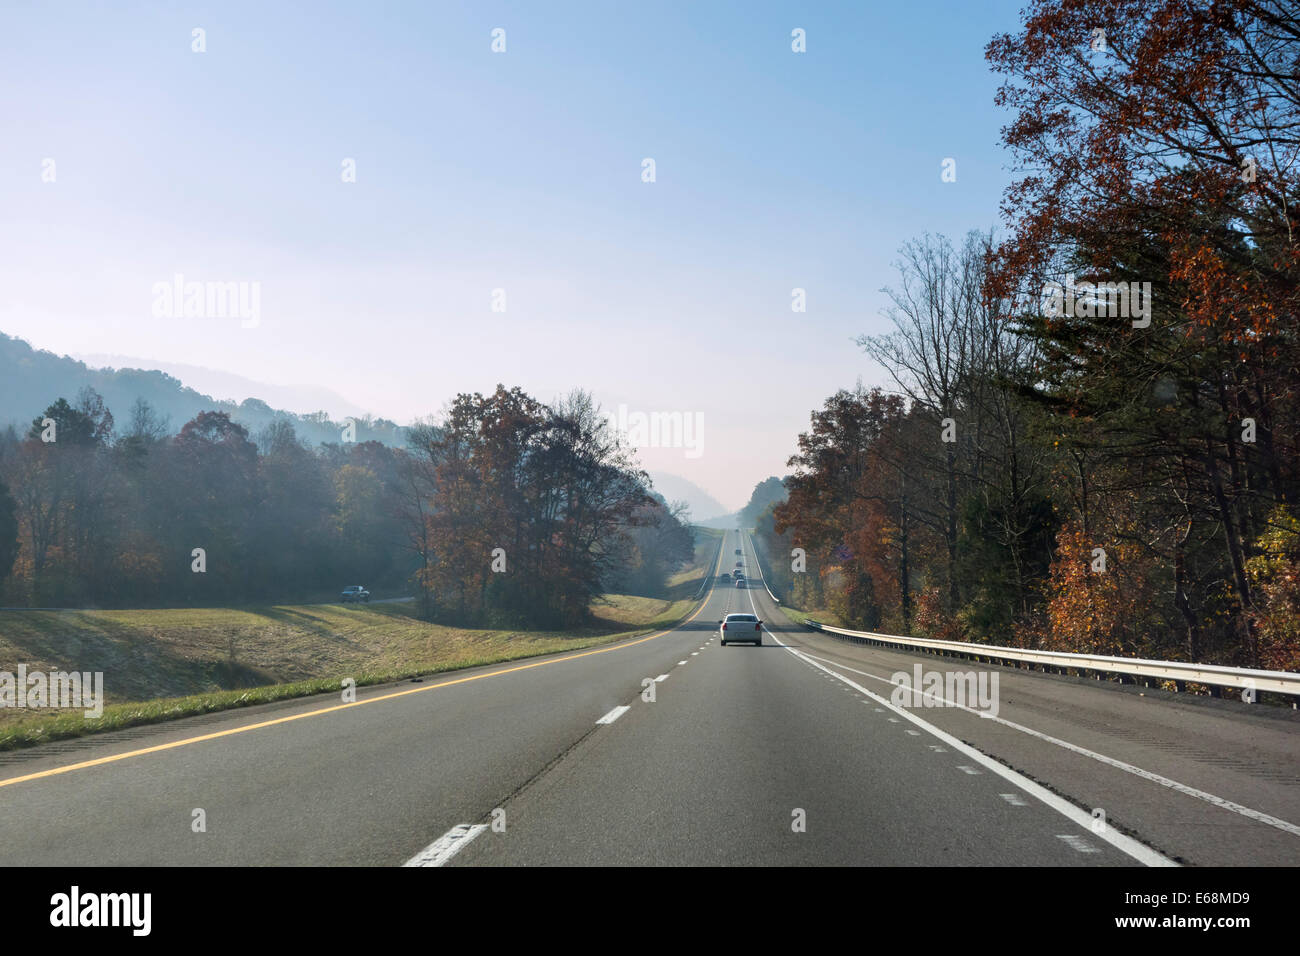 Interstate 40 in Tennessee appena a nord di Great Smoky Mountains National Park, STATI UNITI D'AMERICA Foto Stock